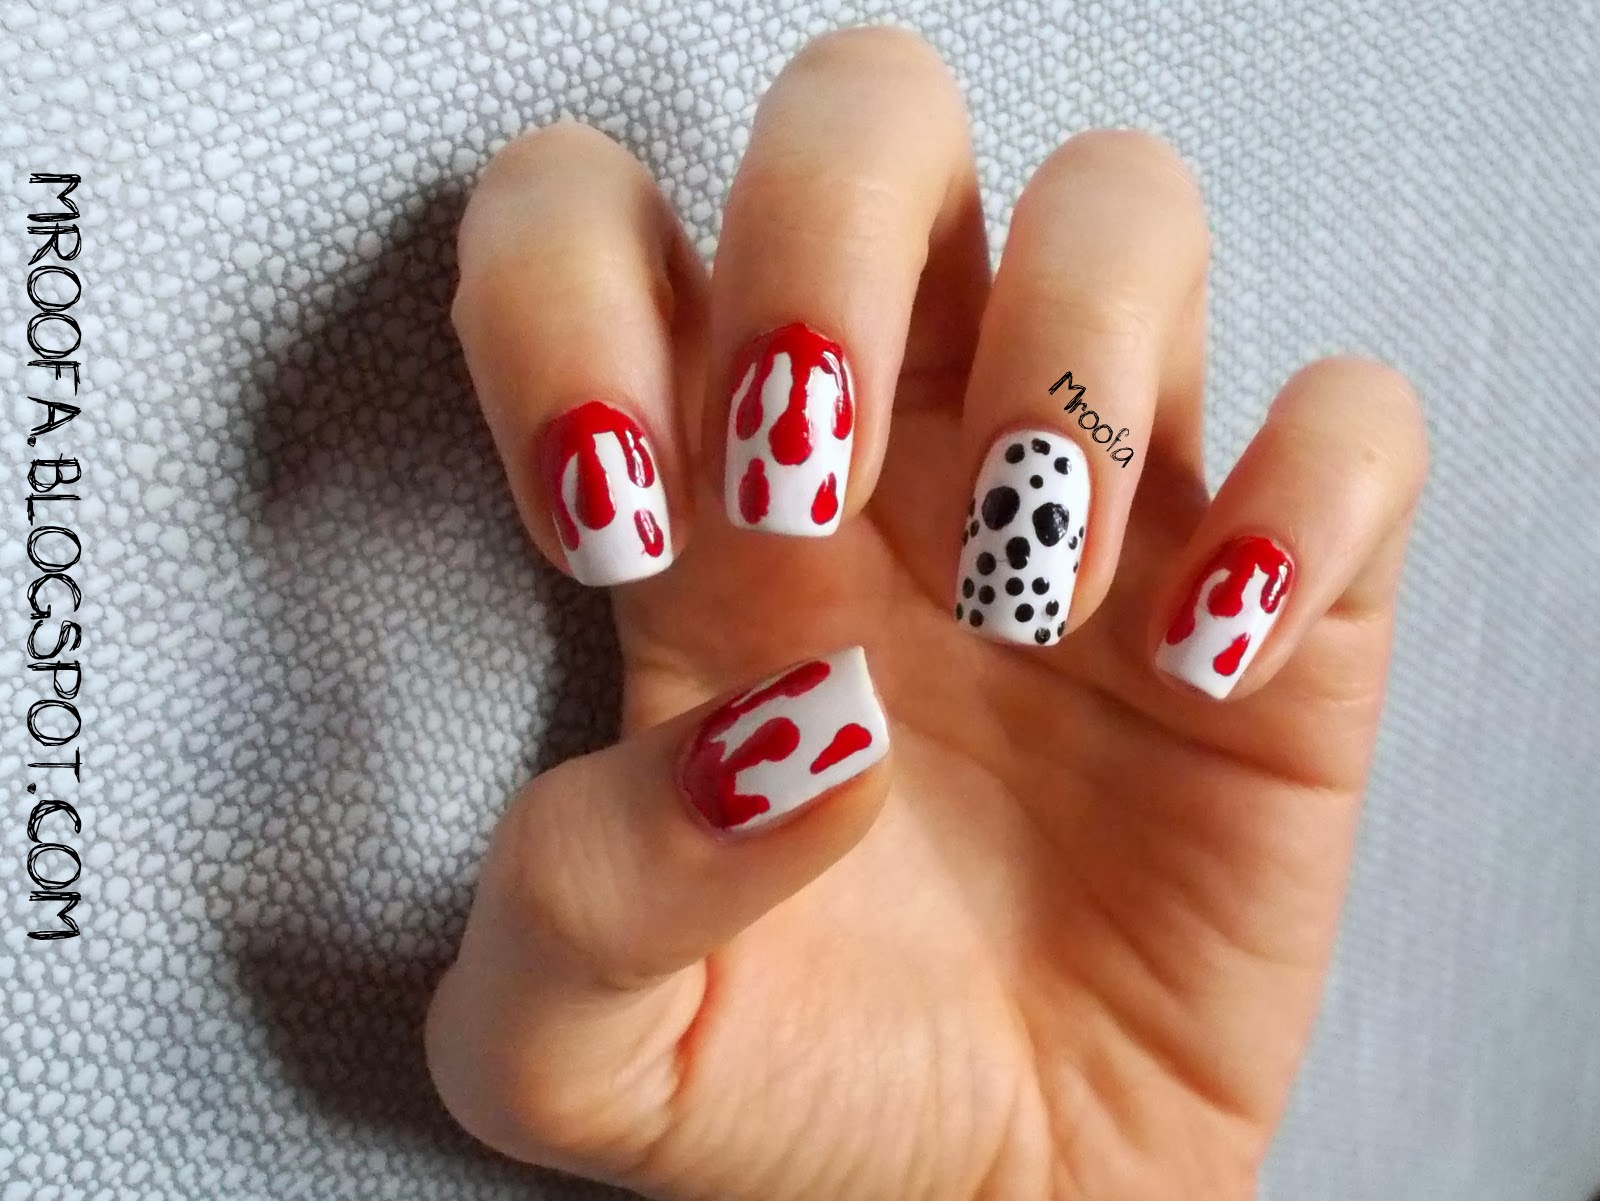 5. "Friday the 13th" Nail Art - wide 6